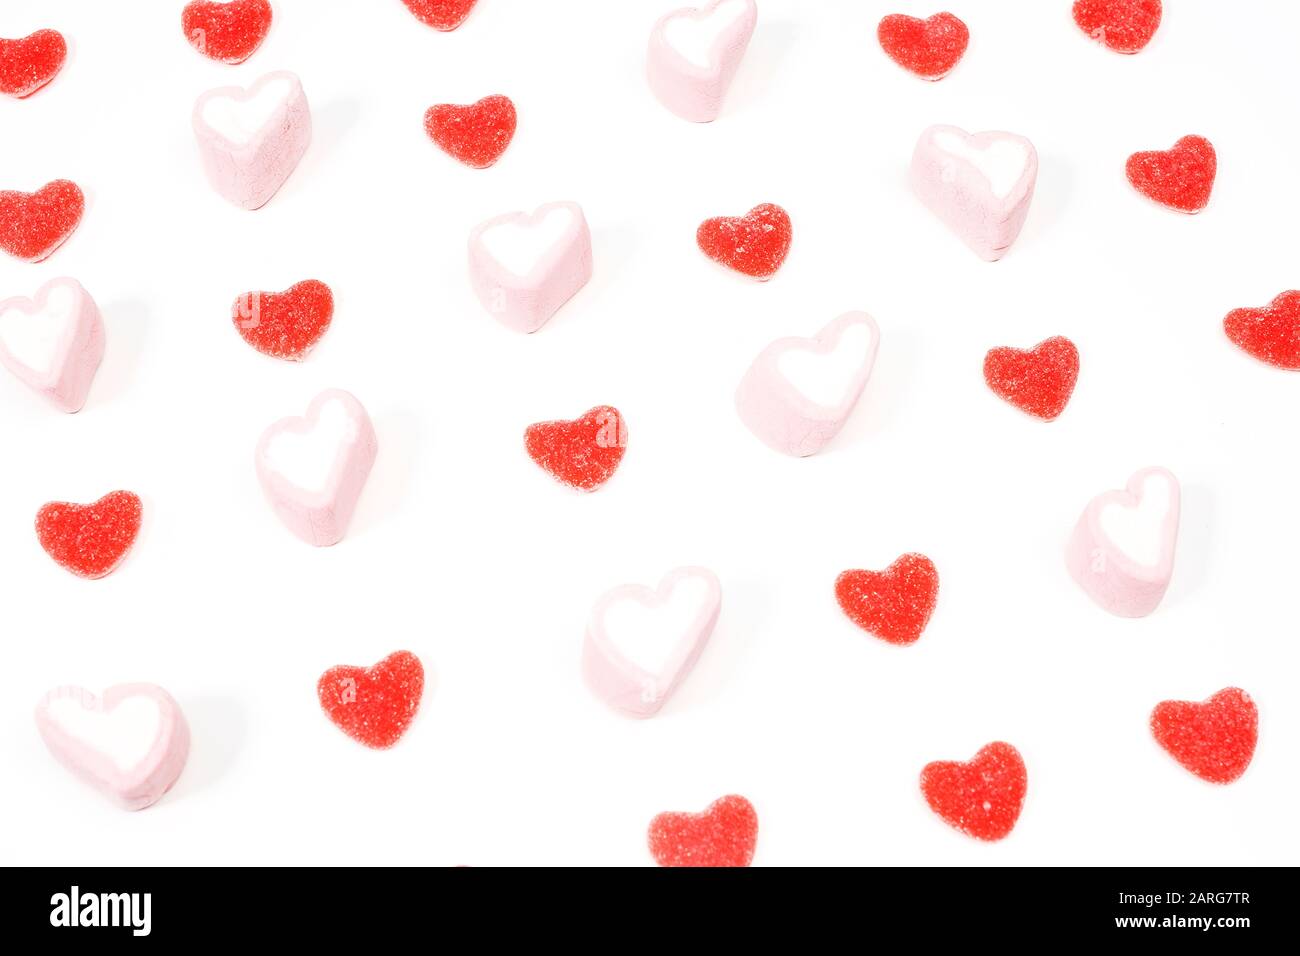 Heartshaped candy treats on a white background Stock Photo